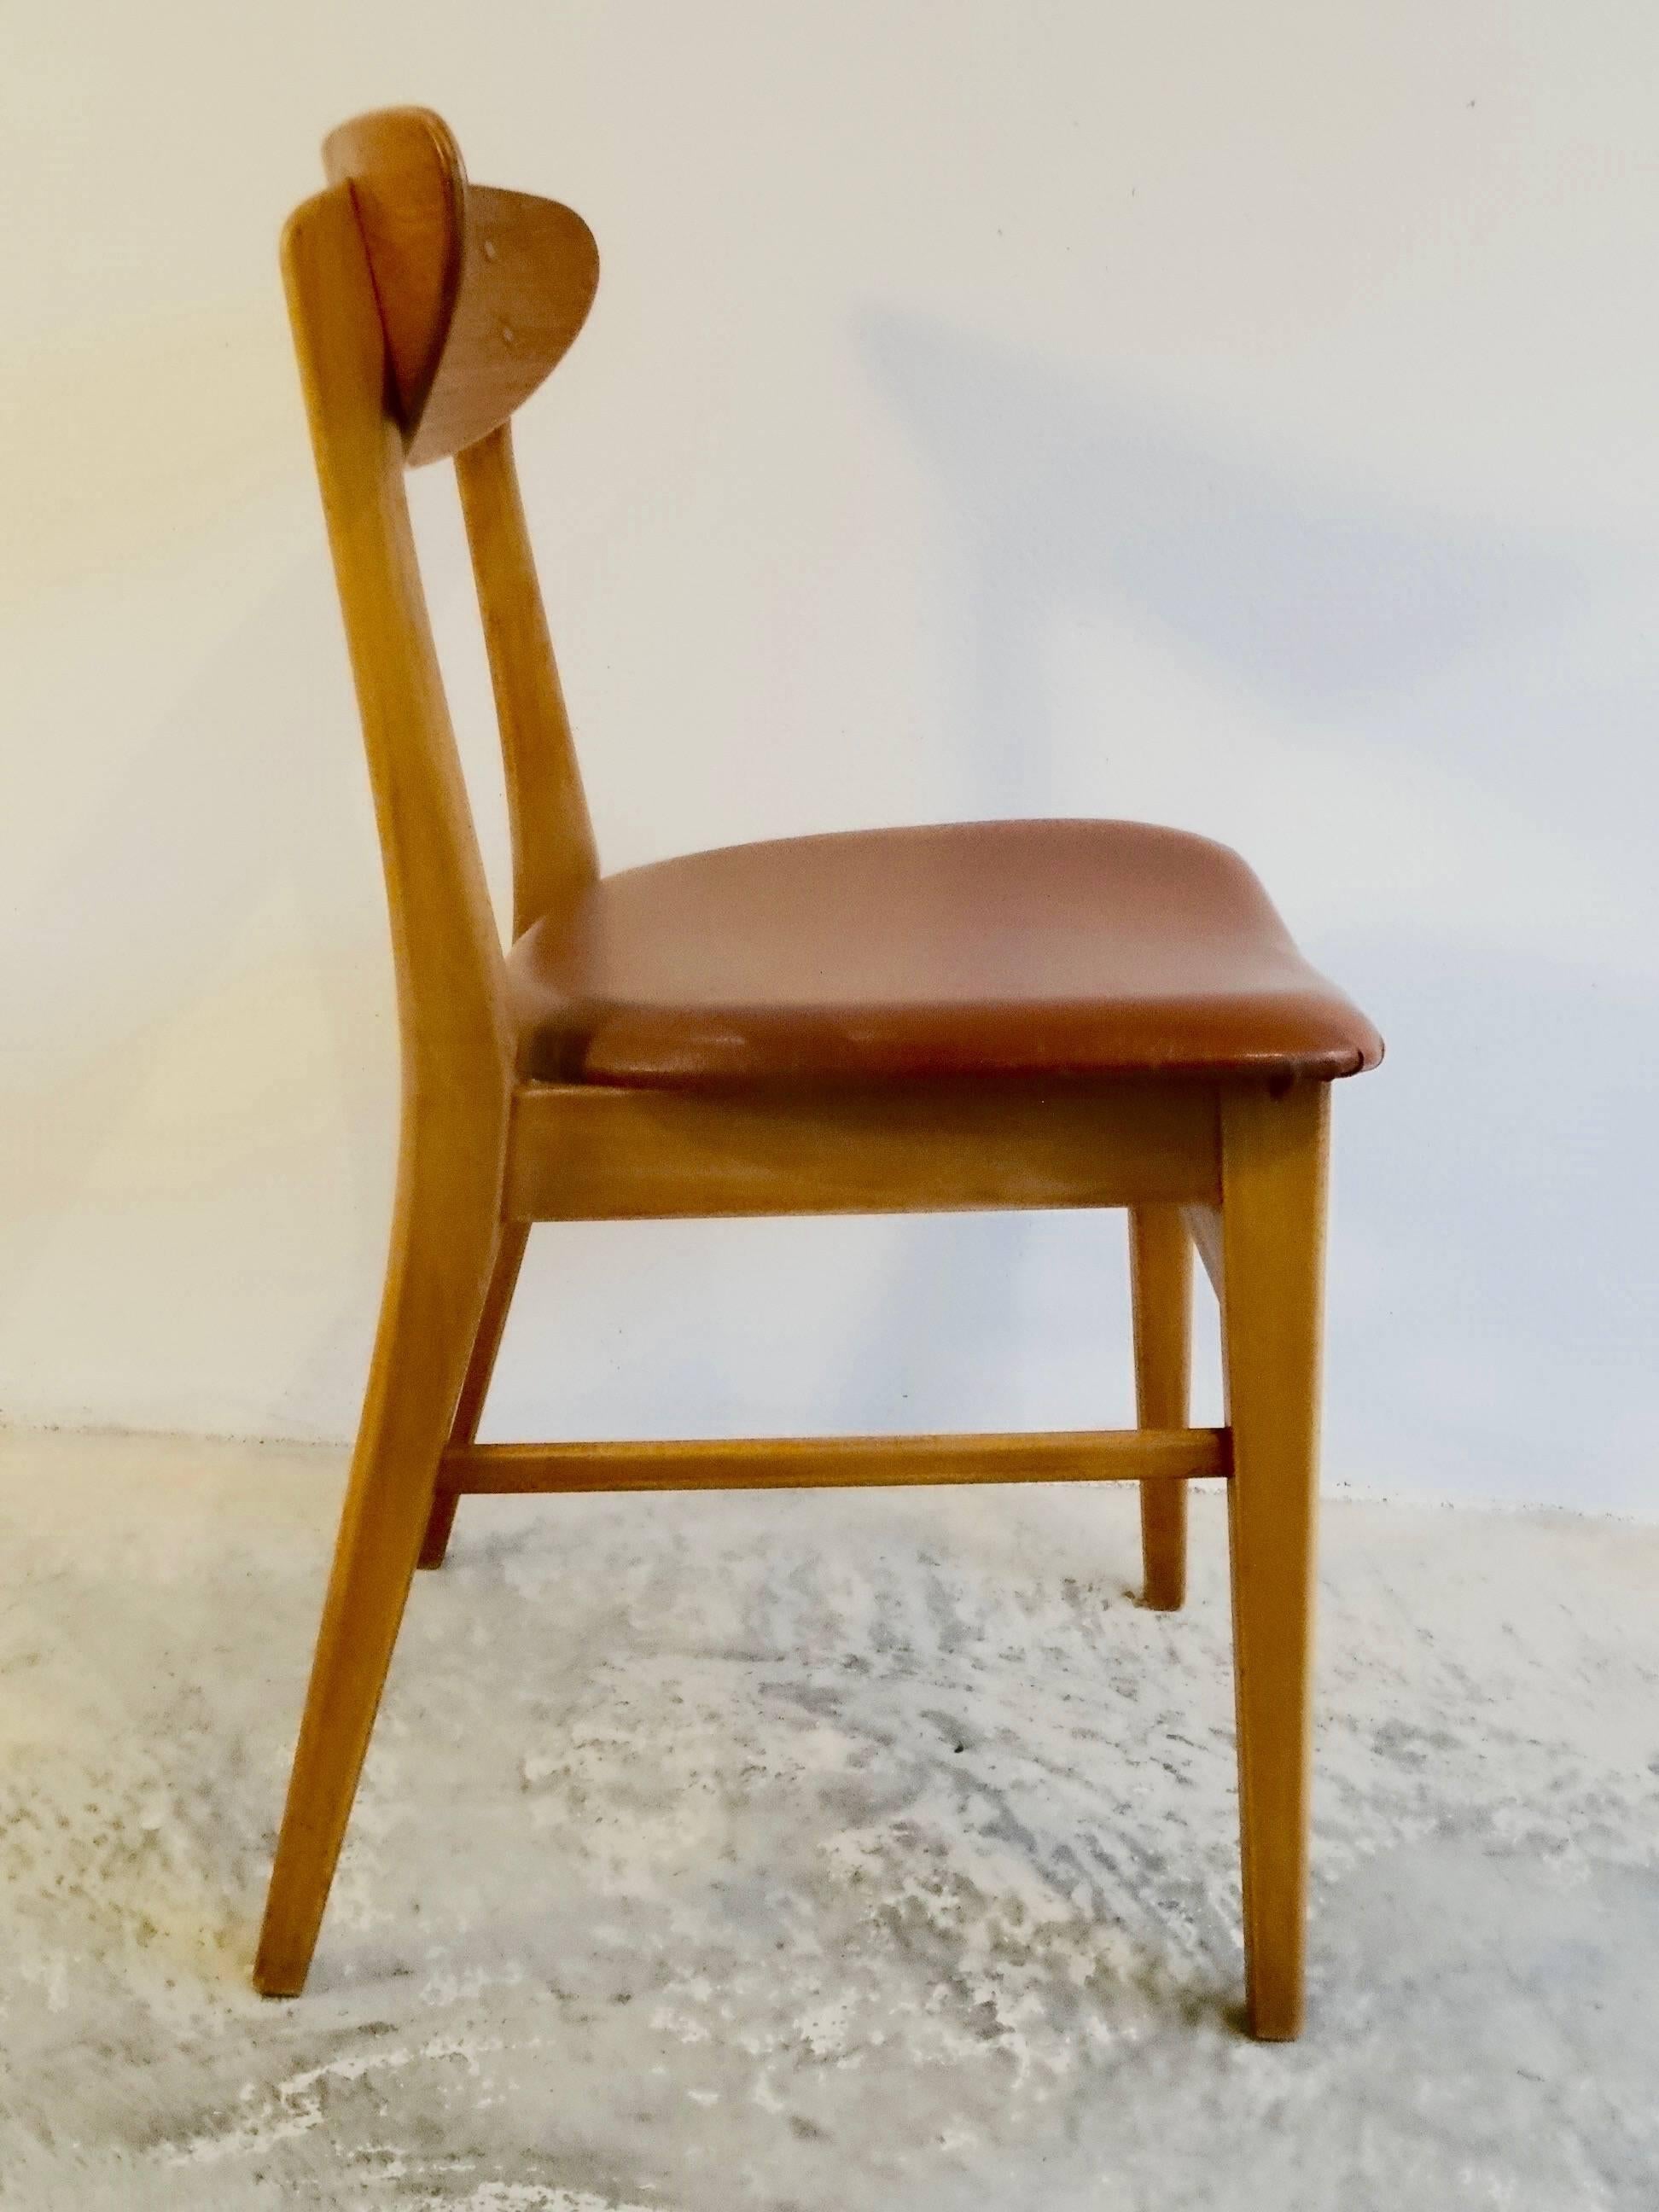 Six Dining Chairs Farstrup, Model 210 In Good Condition For Sale In Klintehamn, SE